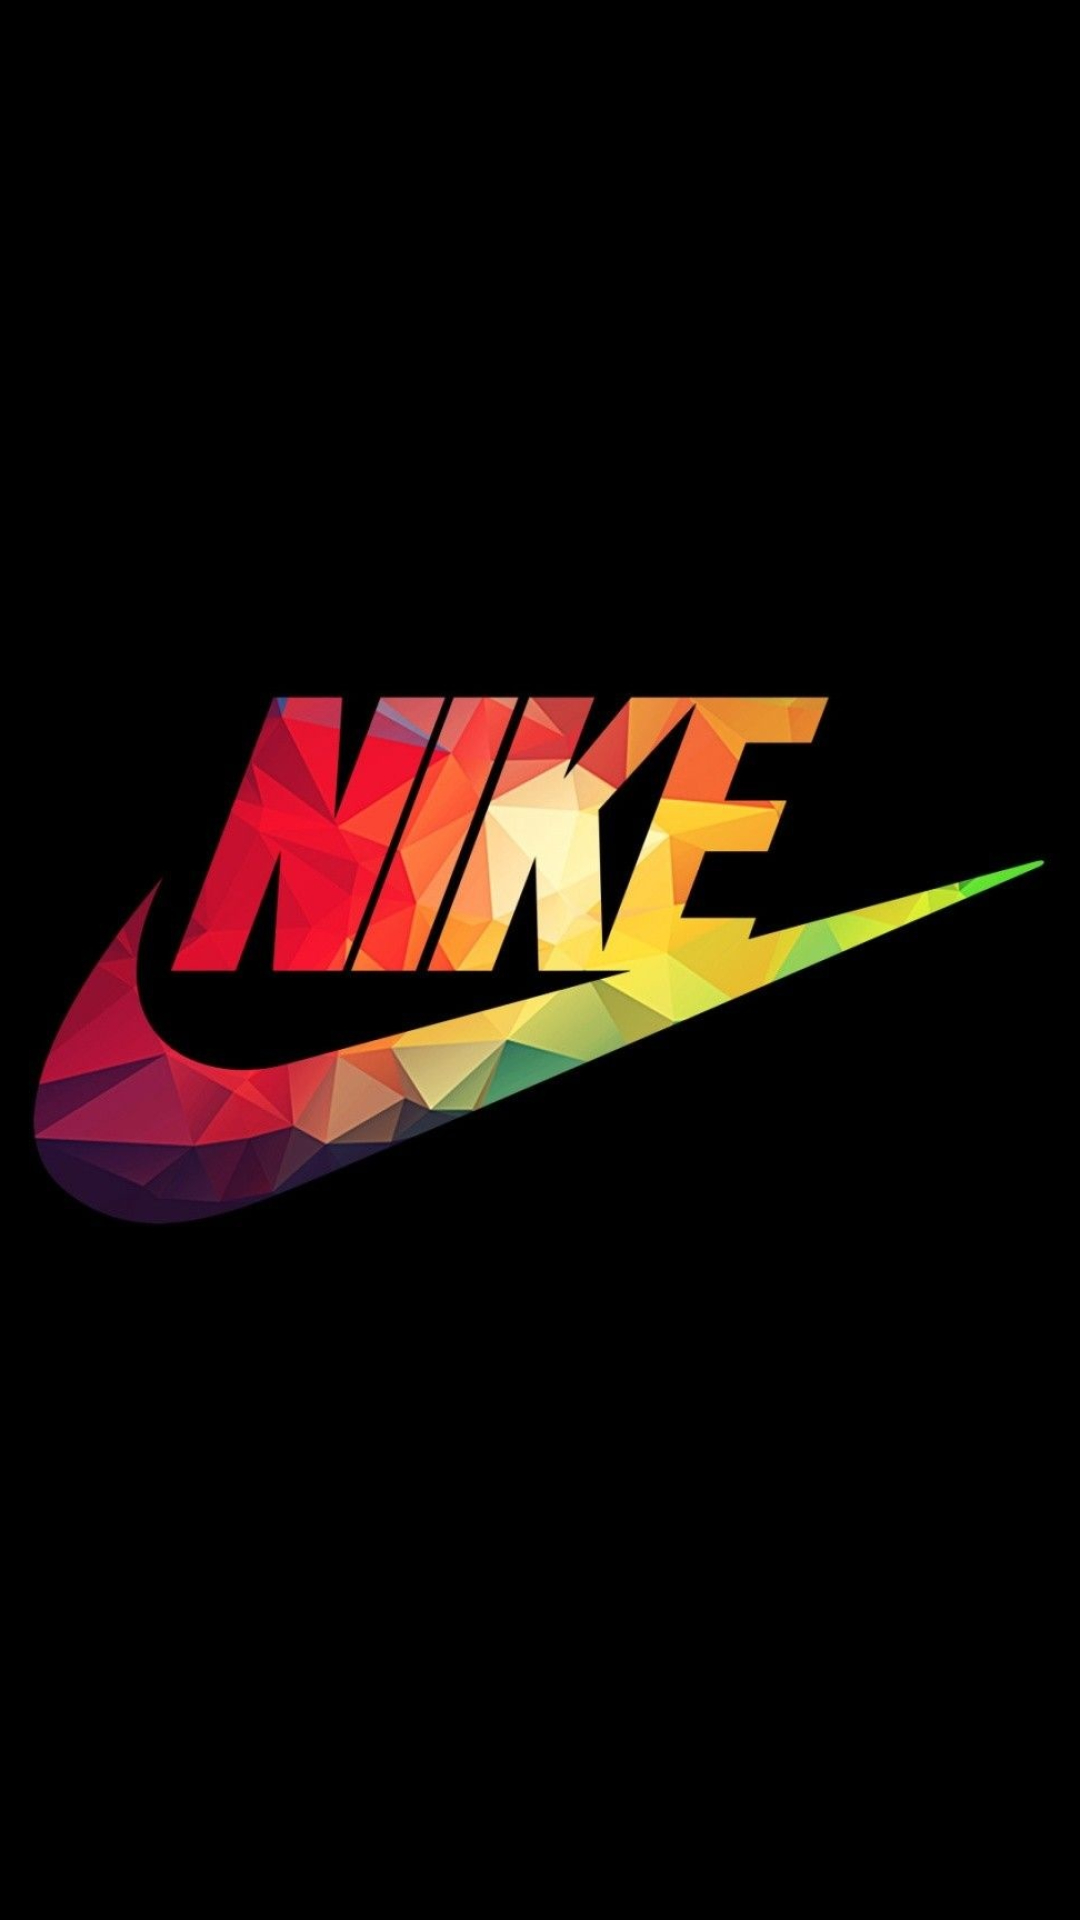 Nike HD phone wallpapers, Quality backgrounds, High-definition images, Mobile wallpaper, 1080x1920 Full HD Handy